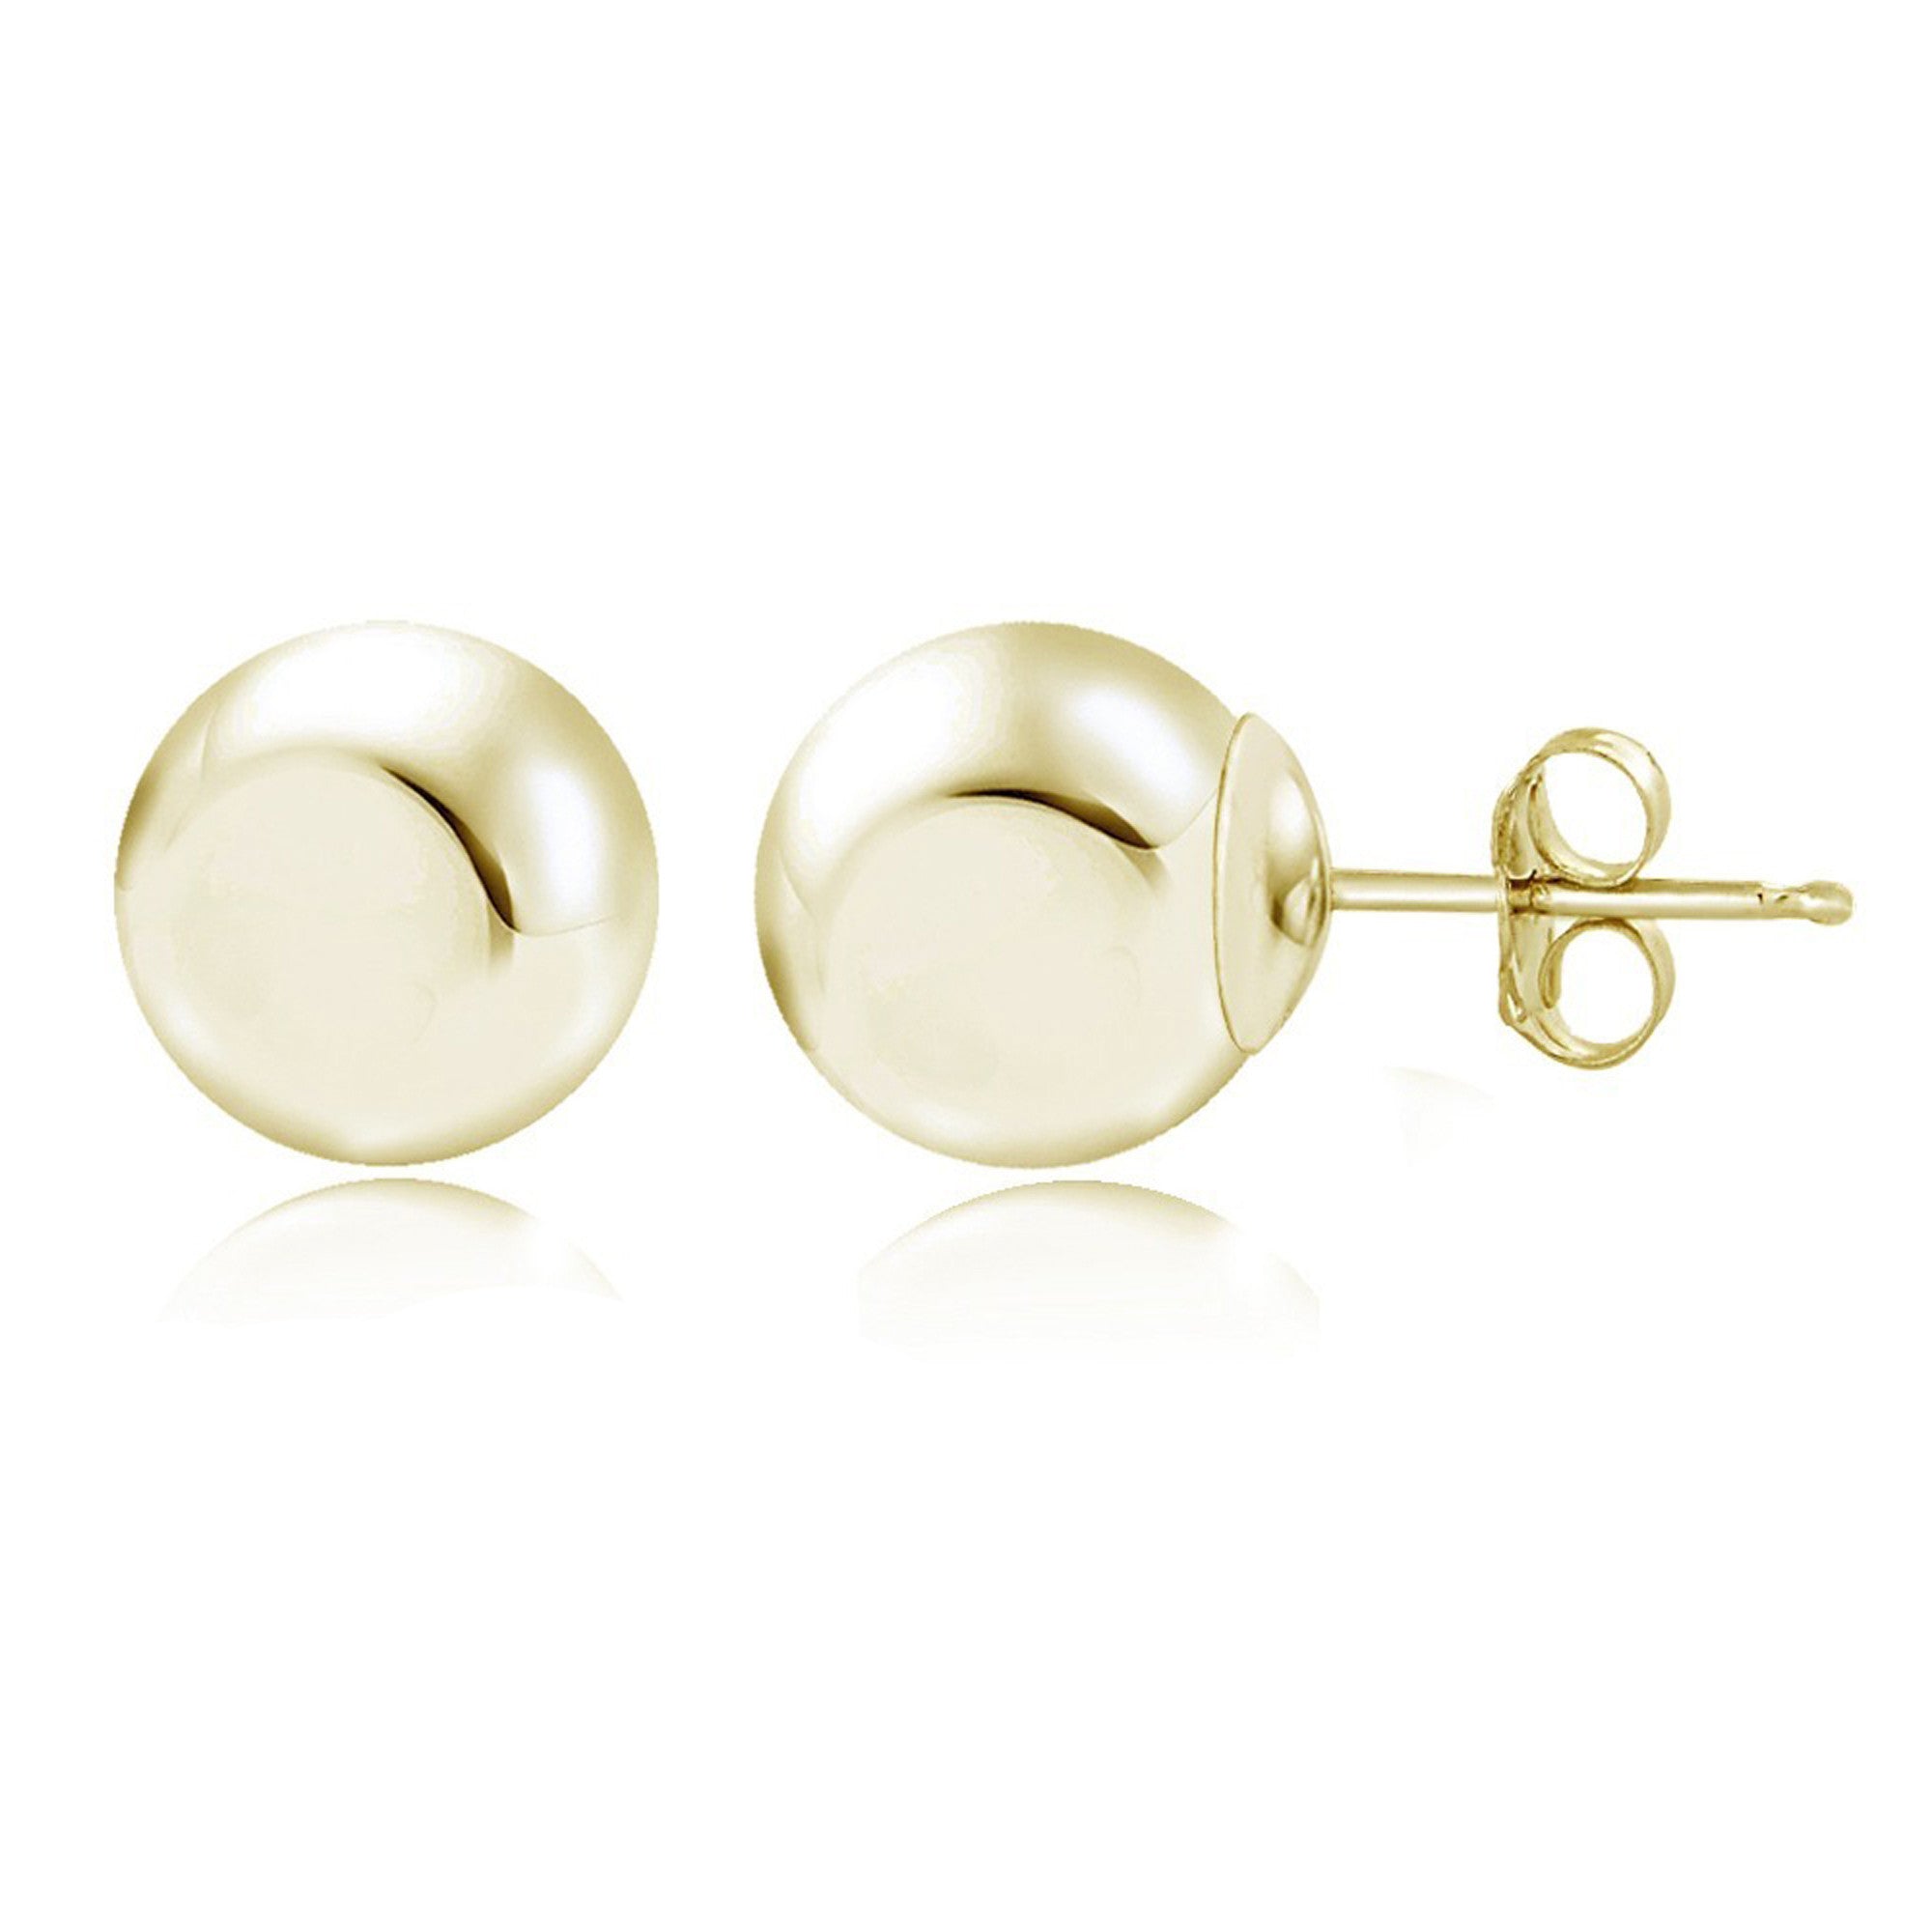 Round Ball Butterfly Clasp Stud Earrings - 7mm Yellow Gold